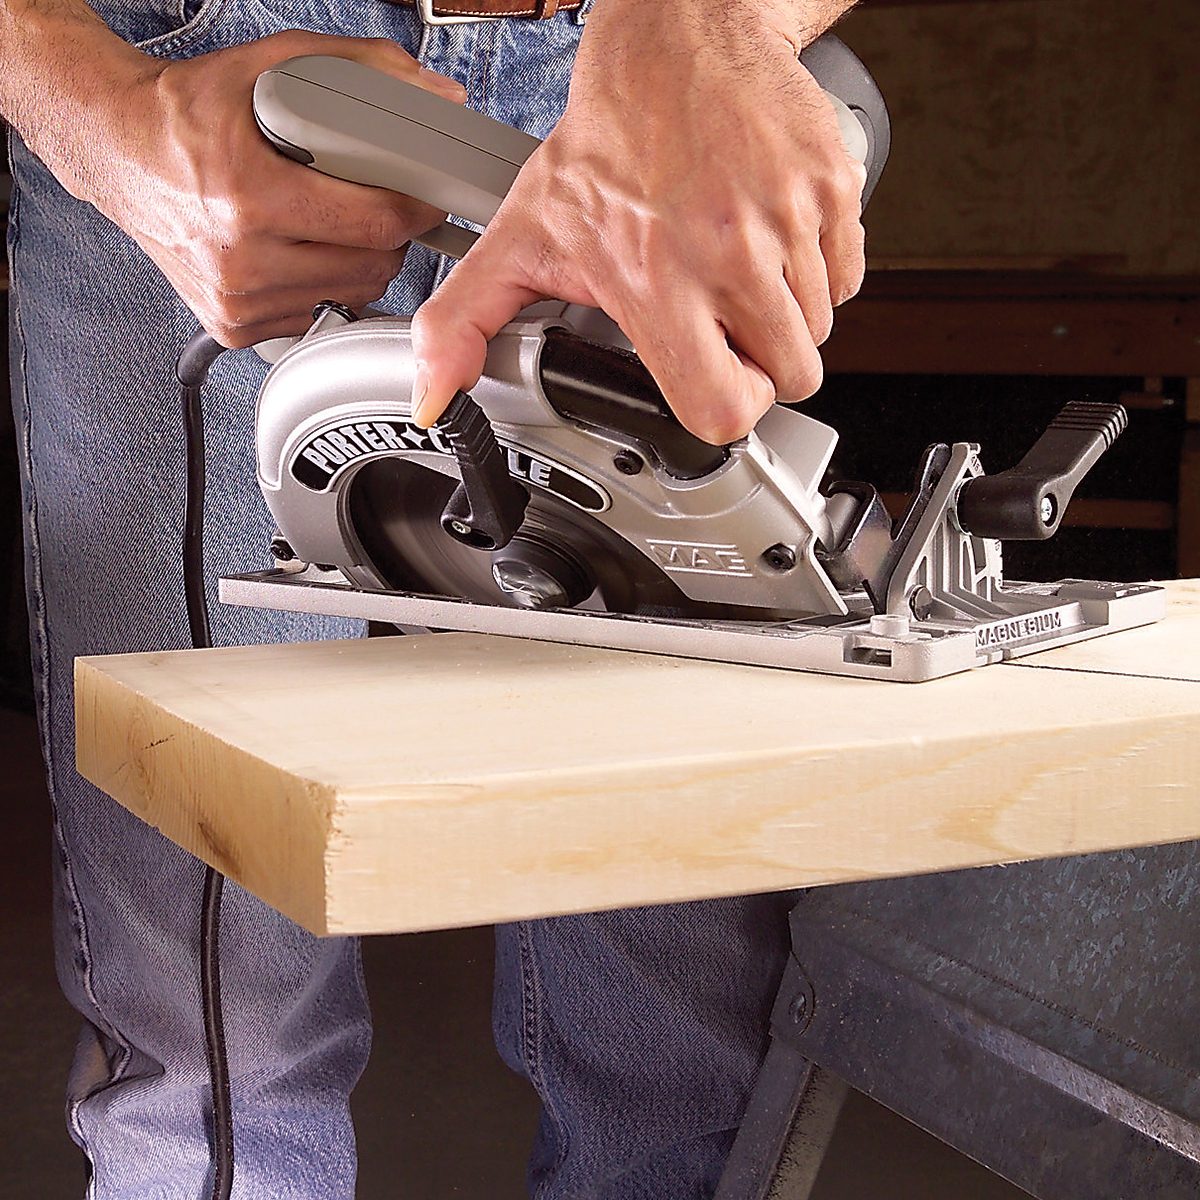 How To Make Angle Cuts With A Circular Saw Fh05jun 459 07 016 Ssedit